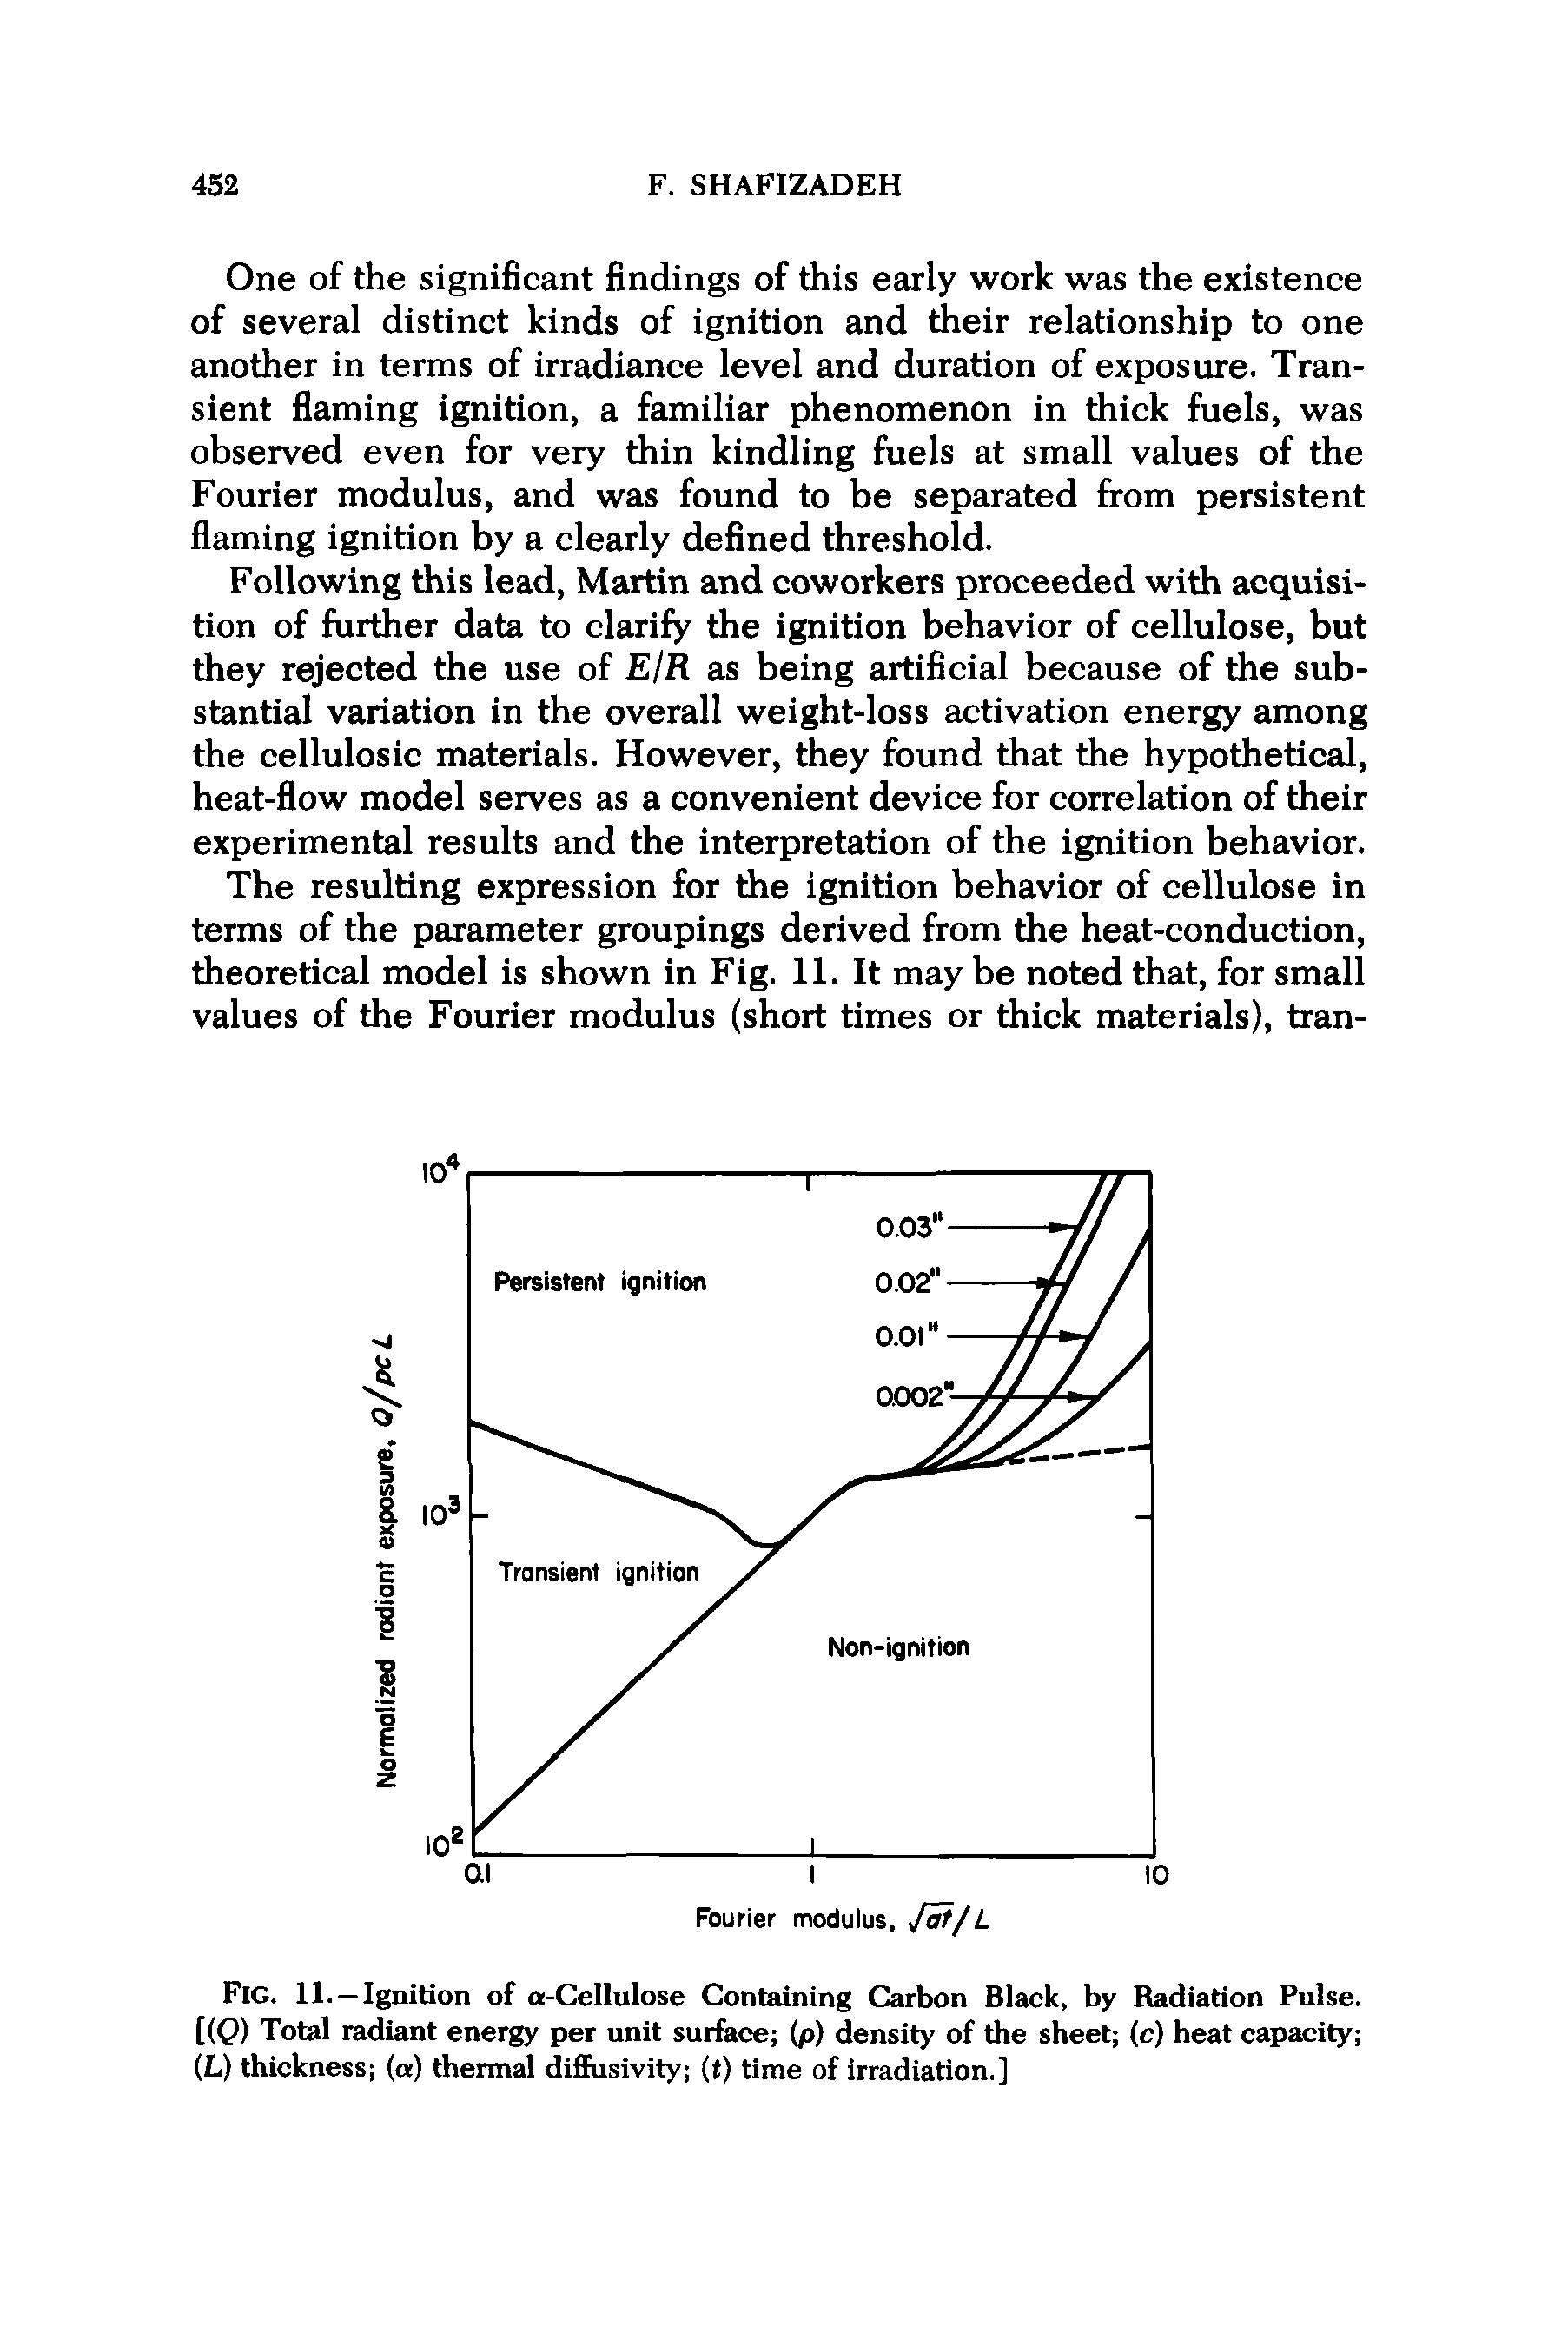 Fig. 11. —Ignition of a-Cellulose Containing Carbon Black, by Radiation Pulse. [(O Total radiant energy per unit surface (p) density of the sheet (c) heat capacity (L) thickness (a) thermal difFusivity (t) time of irradiation.]...